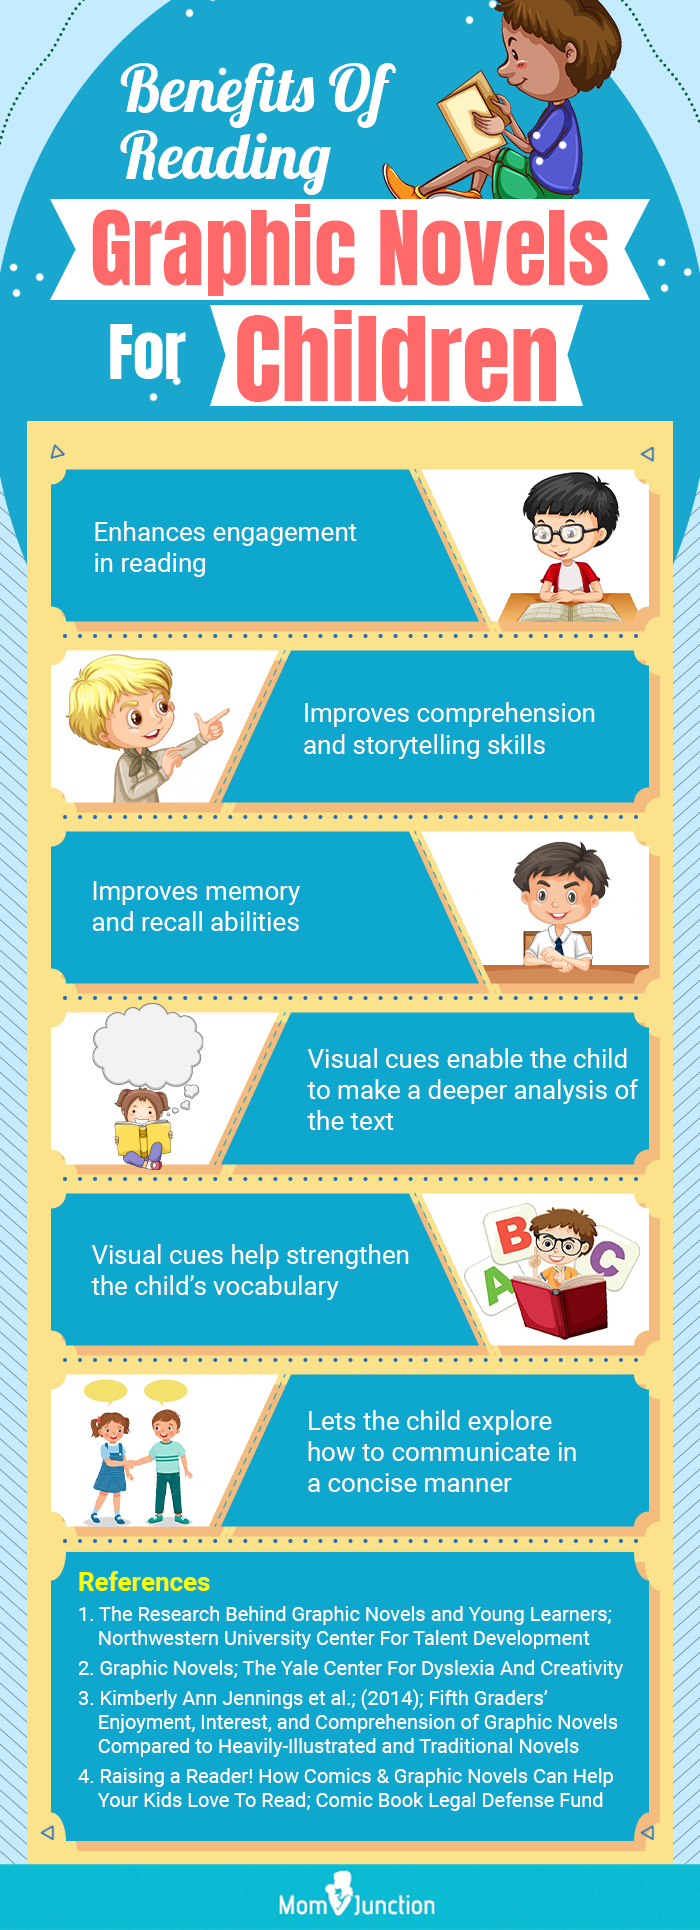 Benefits Of Reading Graphic Novels For Children (infographic)